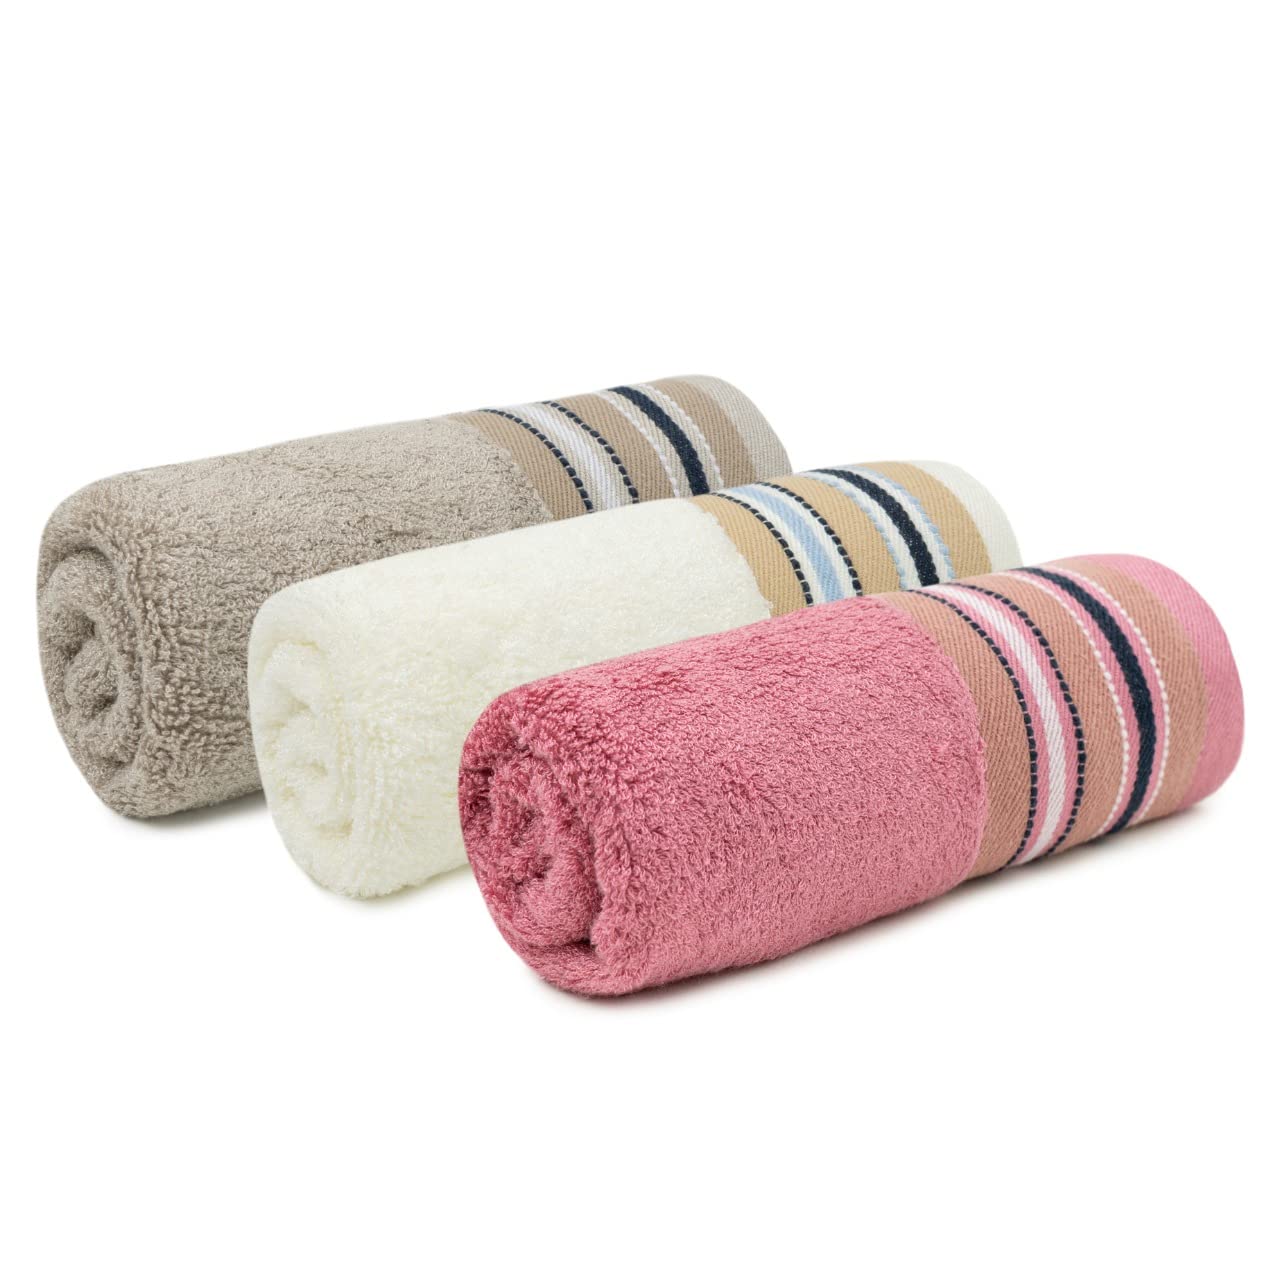 Mush Designer Bamboo Face Towel |Ultra Soft, Absorbent & Quick Dry Towel for Bath, Beach, Pool, Travel, Spa and Yoga (Face Towels, 3 Assorted)